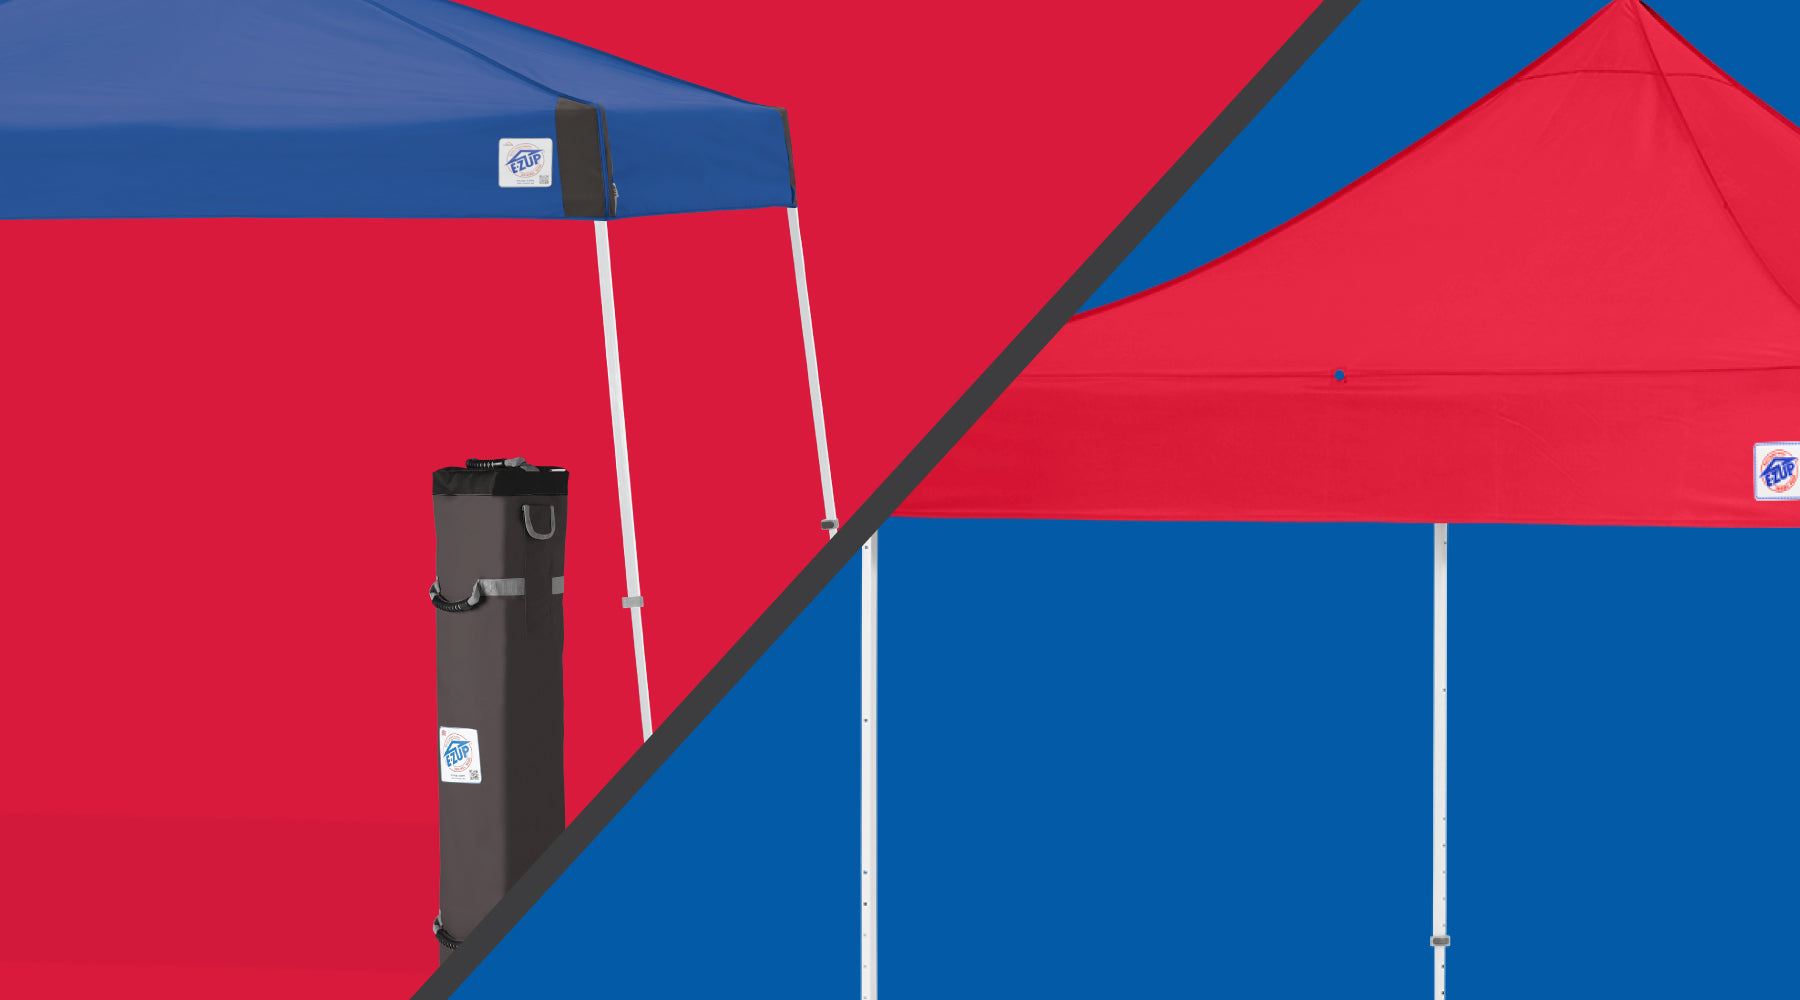 Comparing Straight-Legged and Angle-Legged 10'x10' : Which Option is Best for Your Next Outdoor Adventure ?